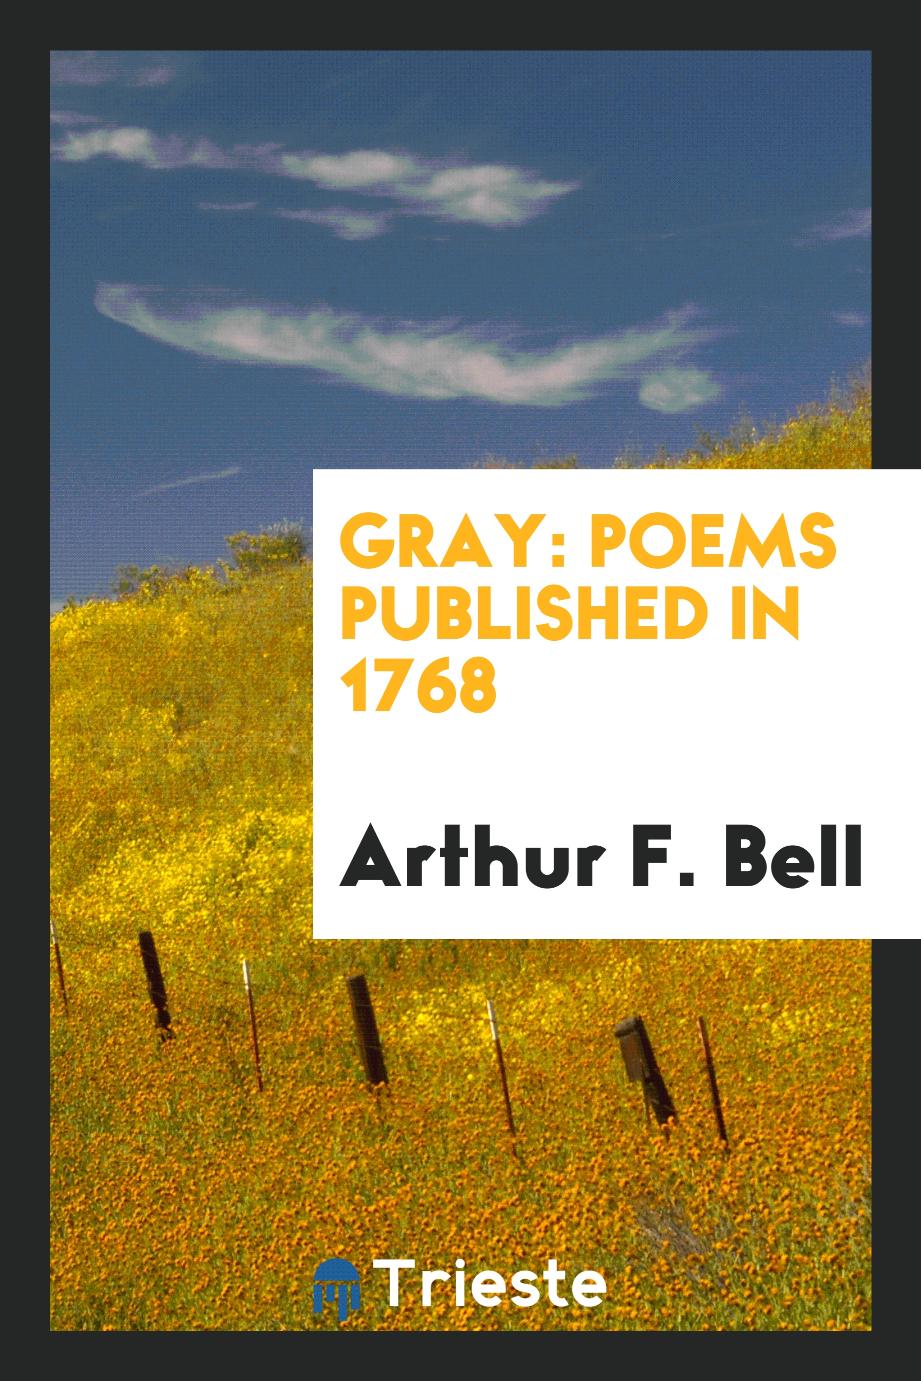 Gray: Poems Published in 1768